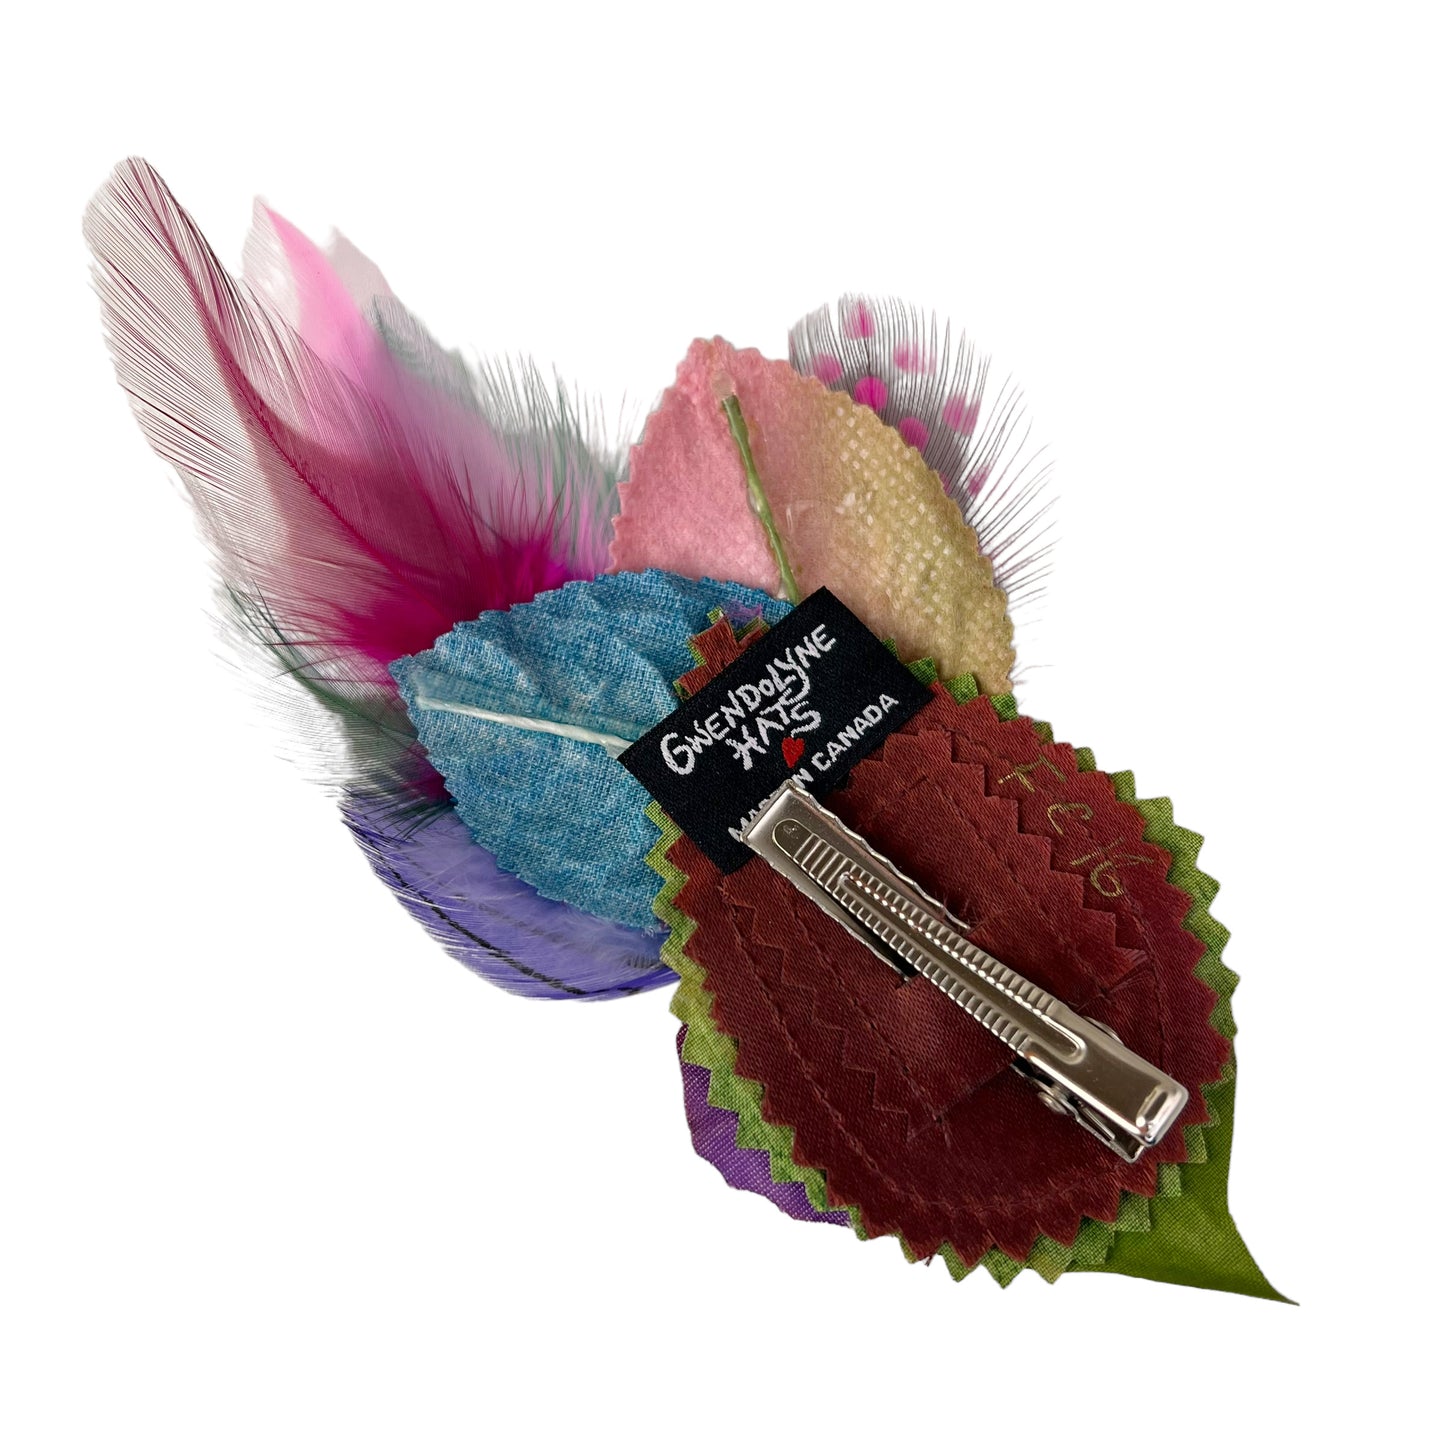 Small Flower Feather Button Hair Clip Purple Pink Light Blue